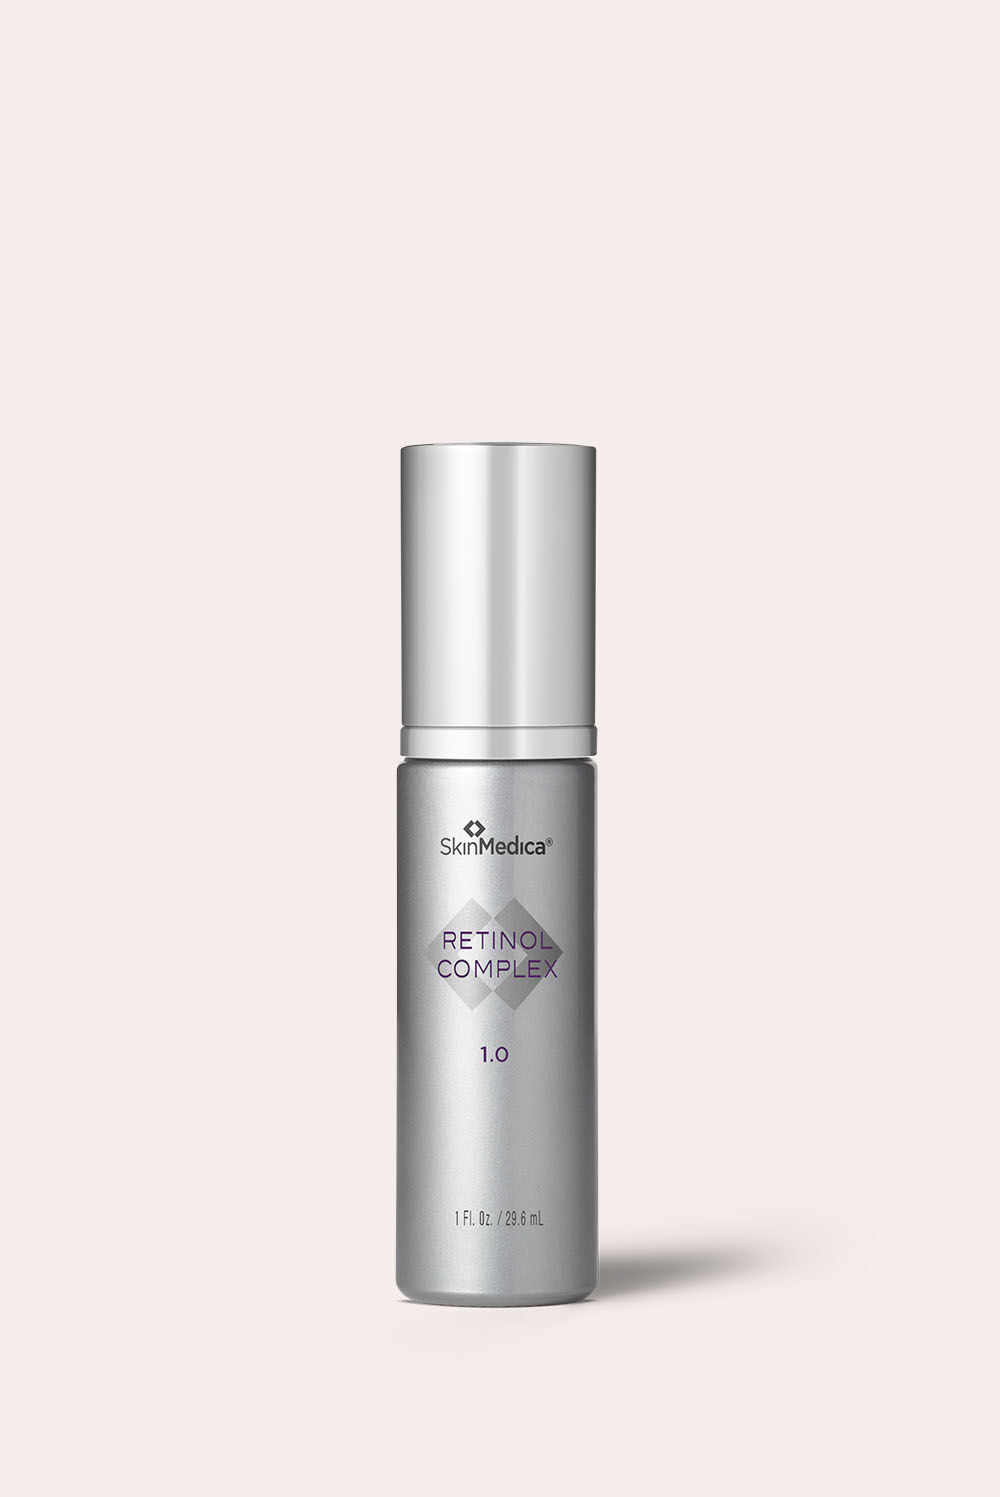 Discover the Remarkable Benefits of SkinMedica Retinol Complex for Radiant and Youthful Skin